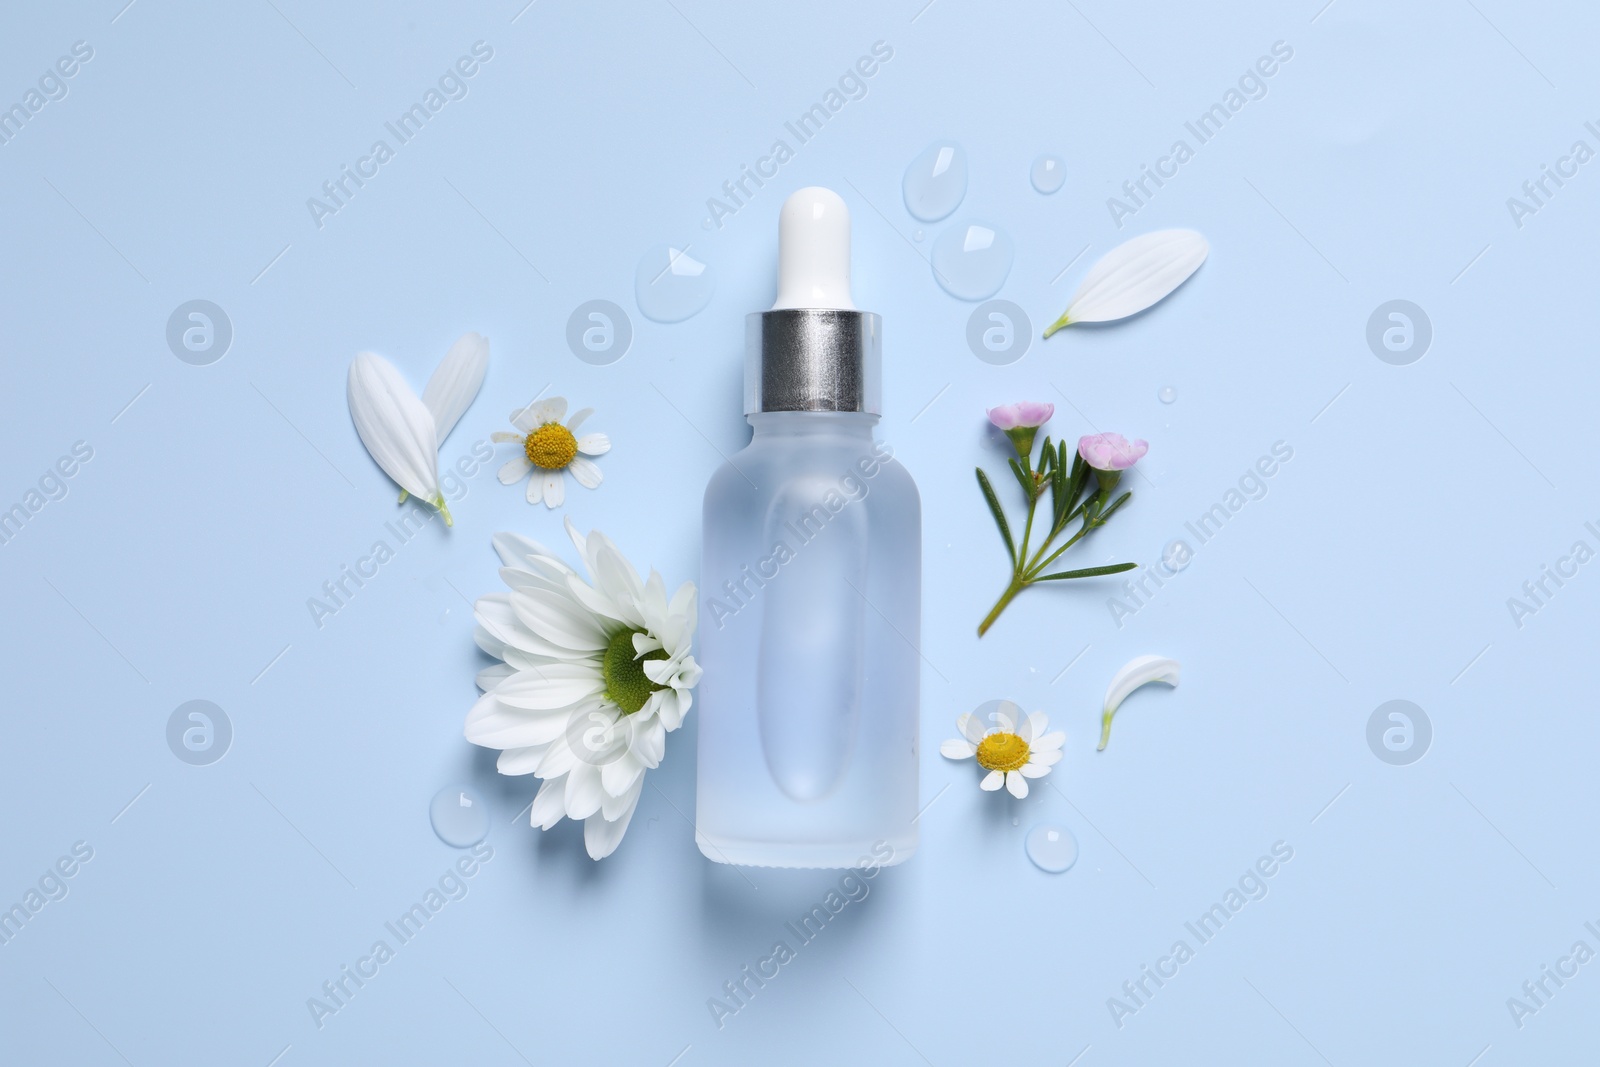 Photo of Bottle of cosmetic serum, flowers and petals on light blue background, flat lay